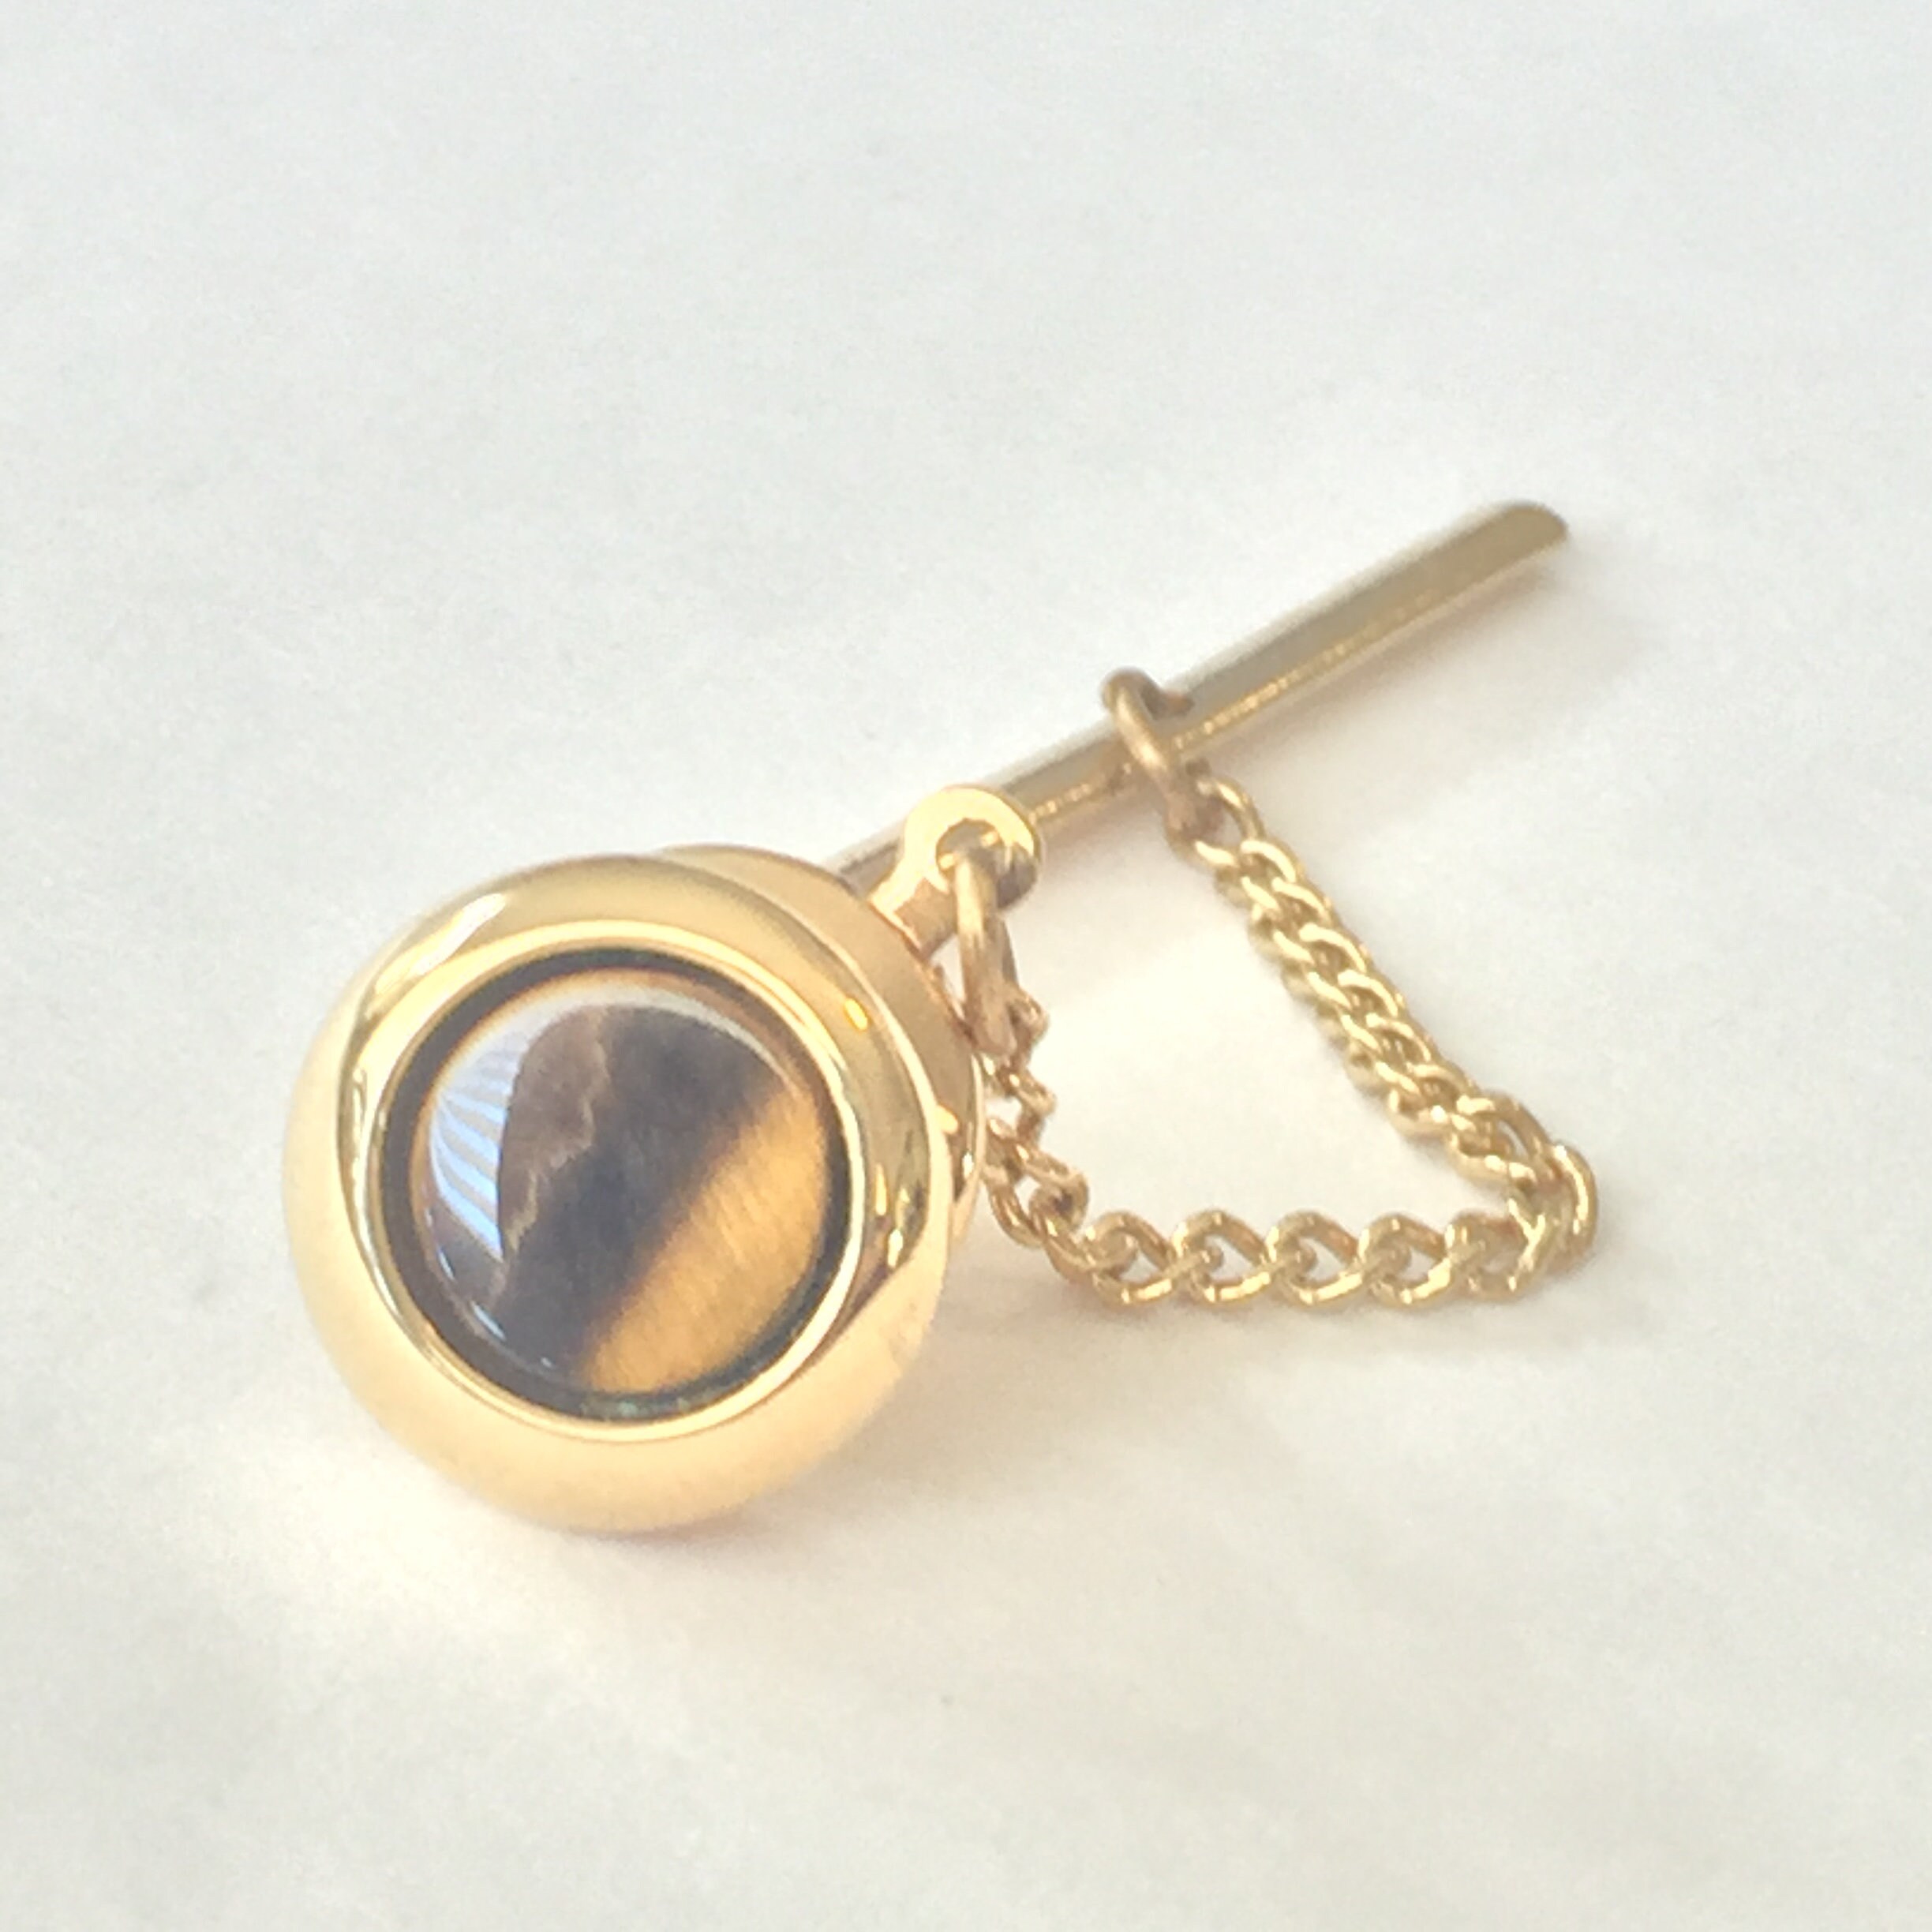 Tie Tack with chain, Tie Clip, Tie Bar, Hand Made Unique Design, Men's  Wedding Jewellery, Gift for him husband, Man Dad gifts